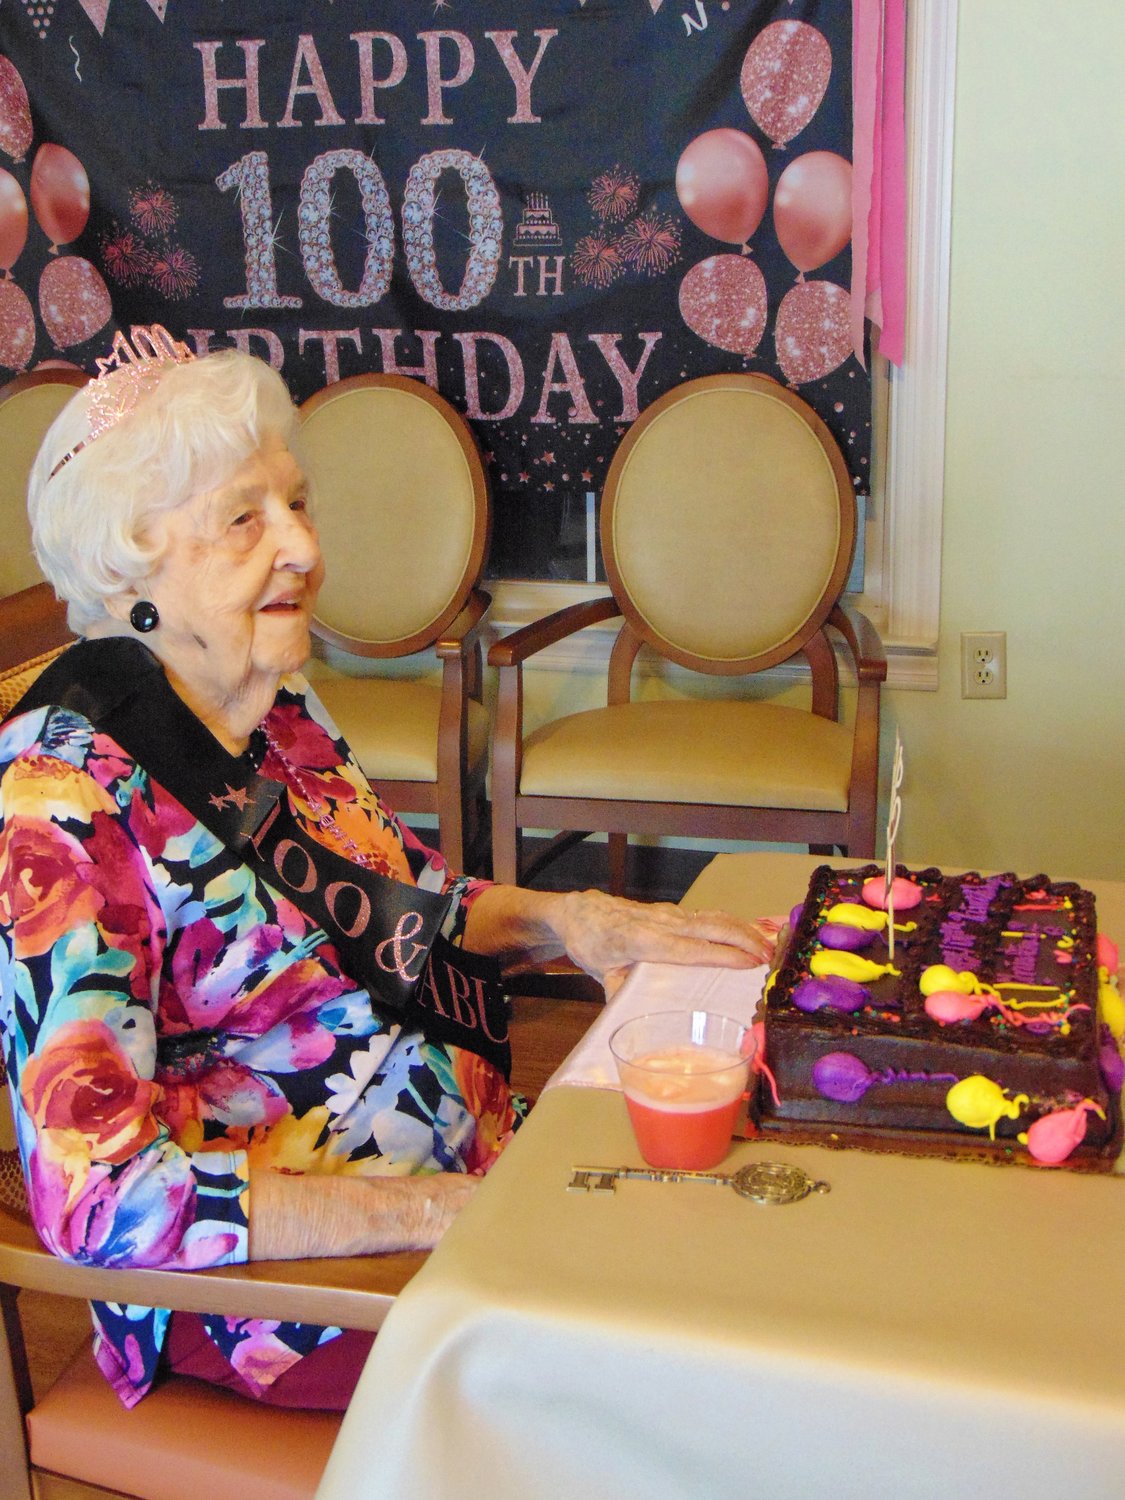 Christine Craighead celebrated her 100th birthday on March 9 - with chocolate cake.